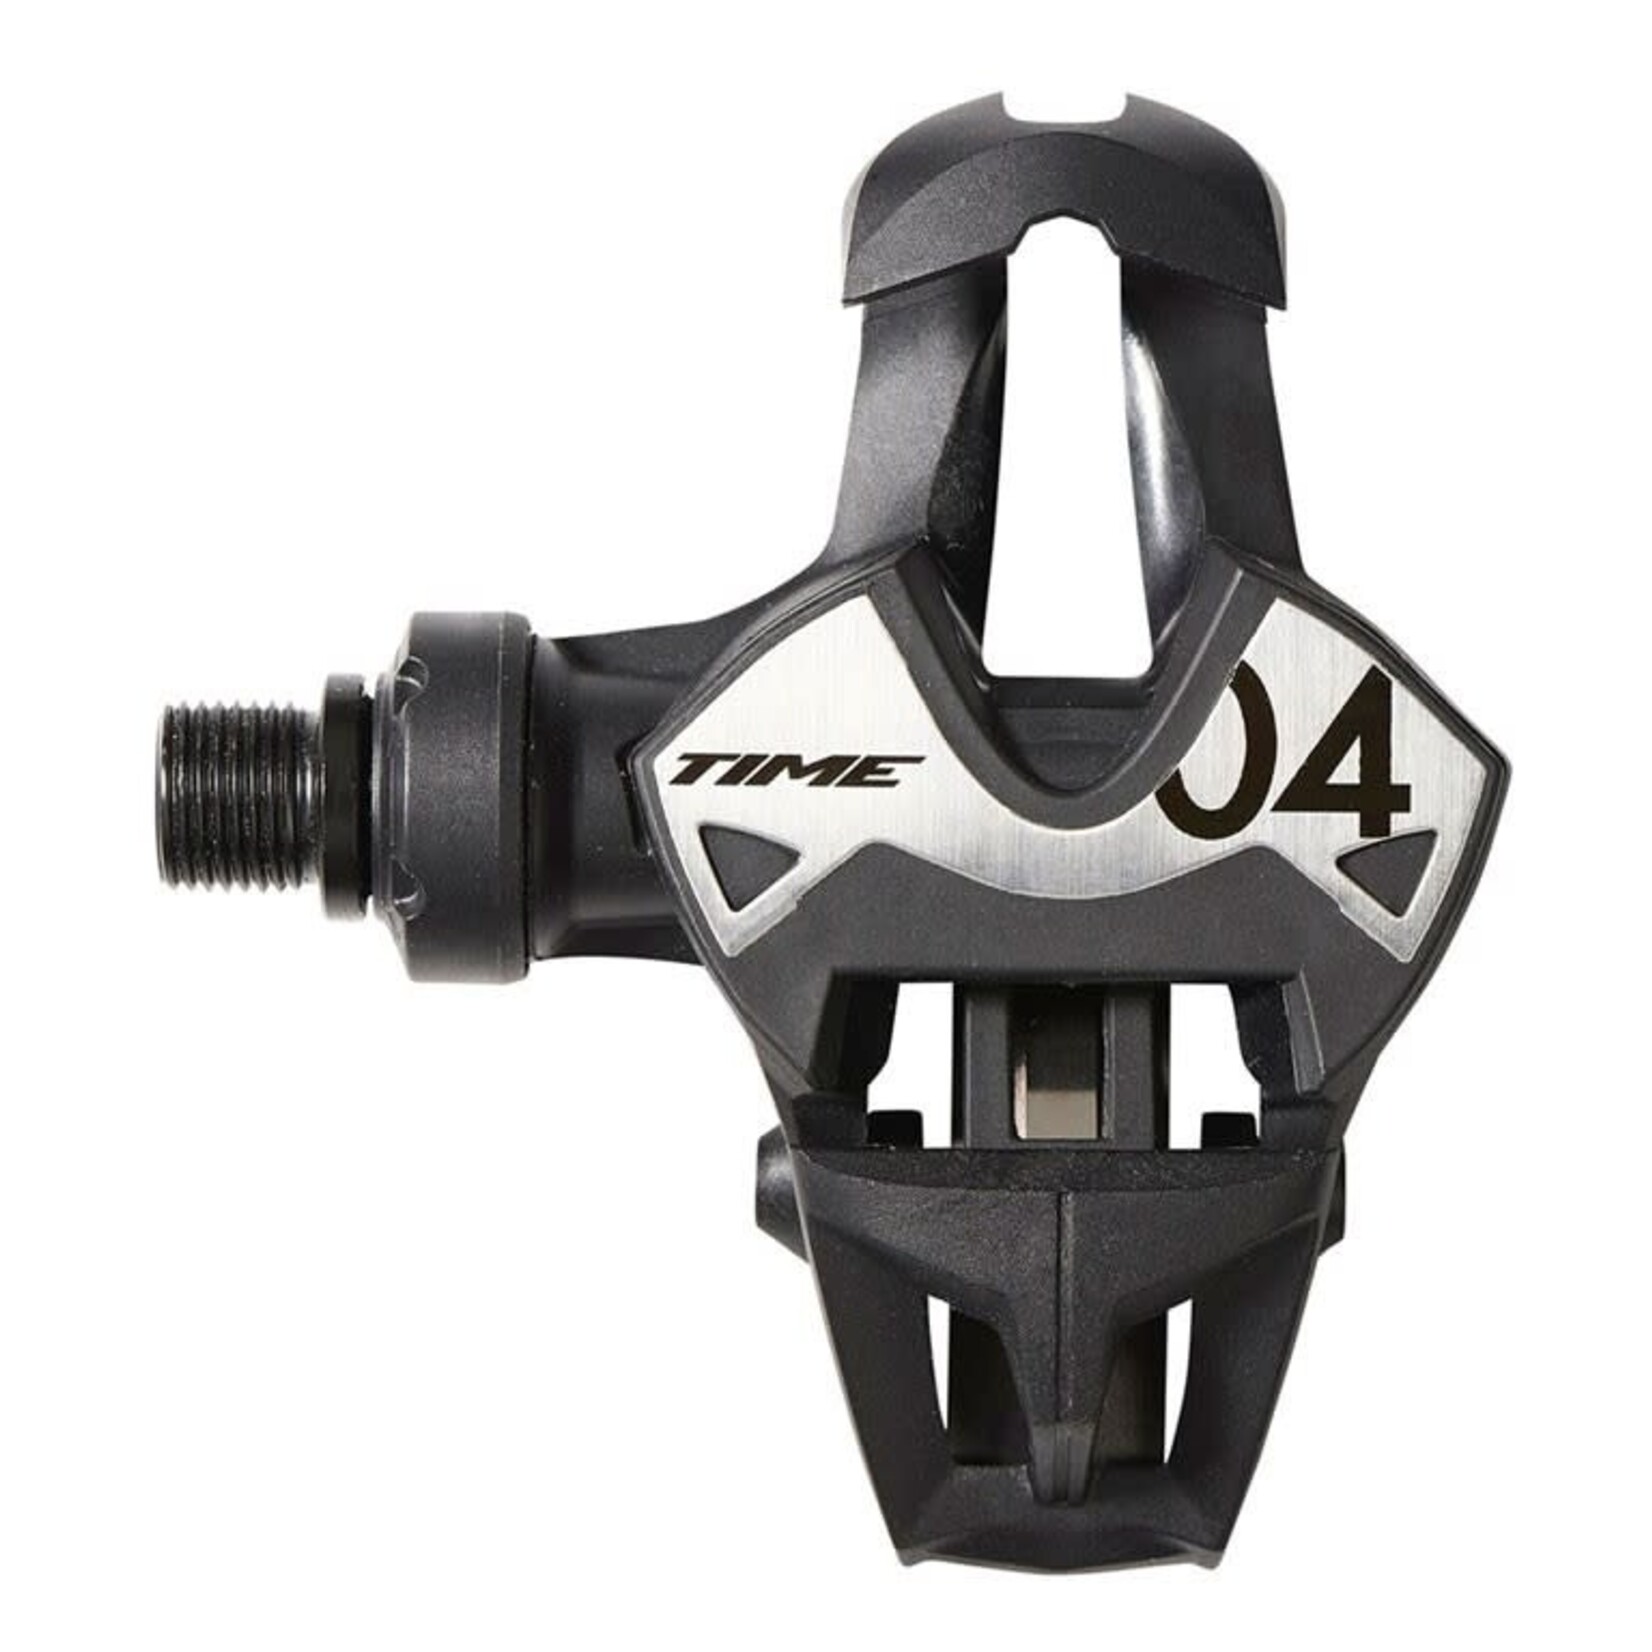 Time TIME, Xpresso 4, Pedals, Body: Composite, Spindle: Steel, 9/16'', Black, Pair